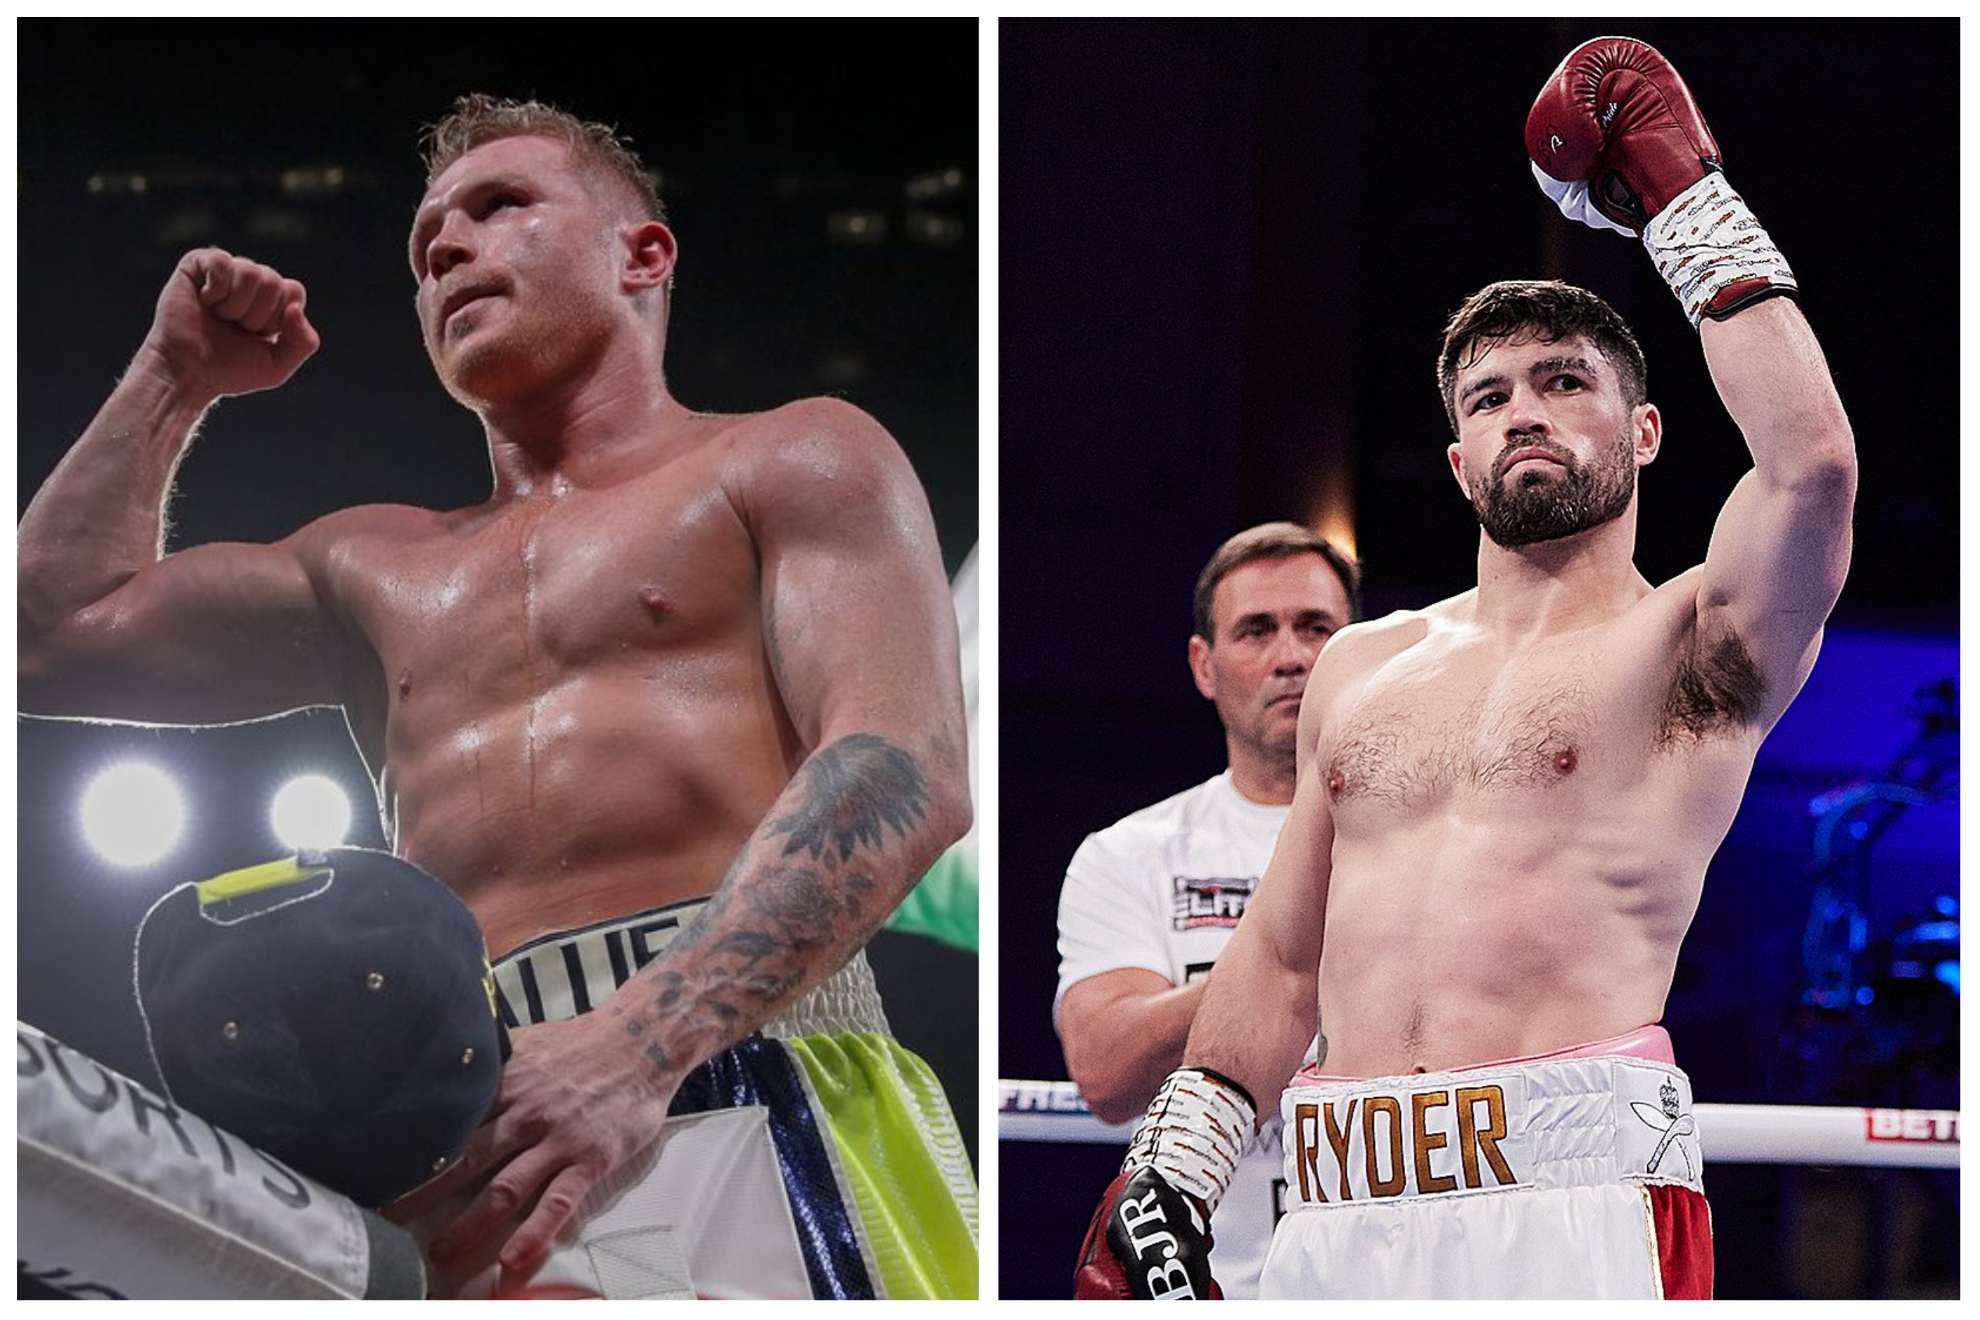 Saul "Canelo" Alvarez will reportedly fight in Mexico after more than a decade absent.